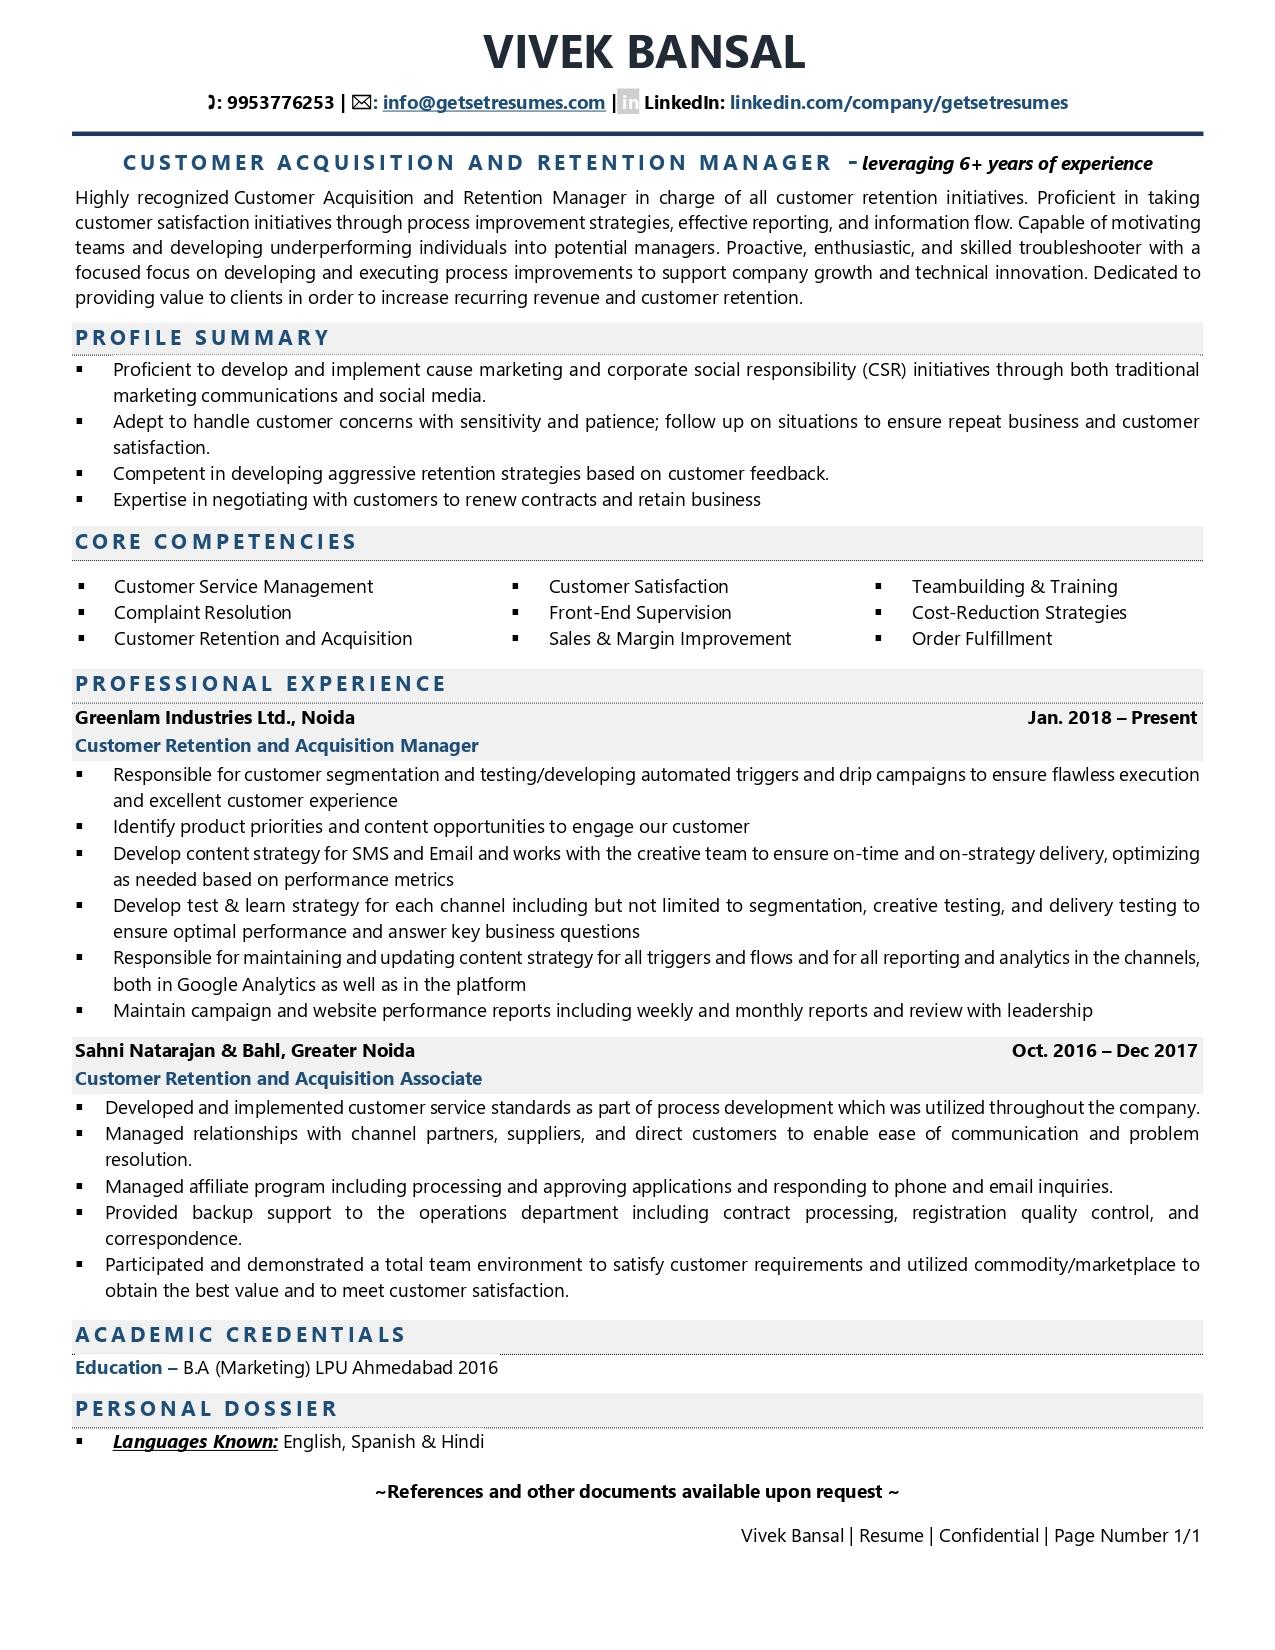 Customer Acquisition & Retention Manager - Resume Example & Template